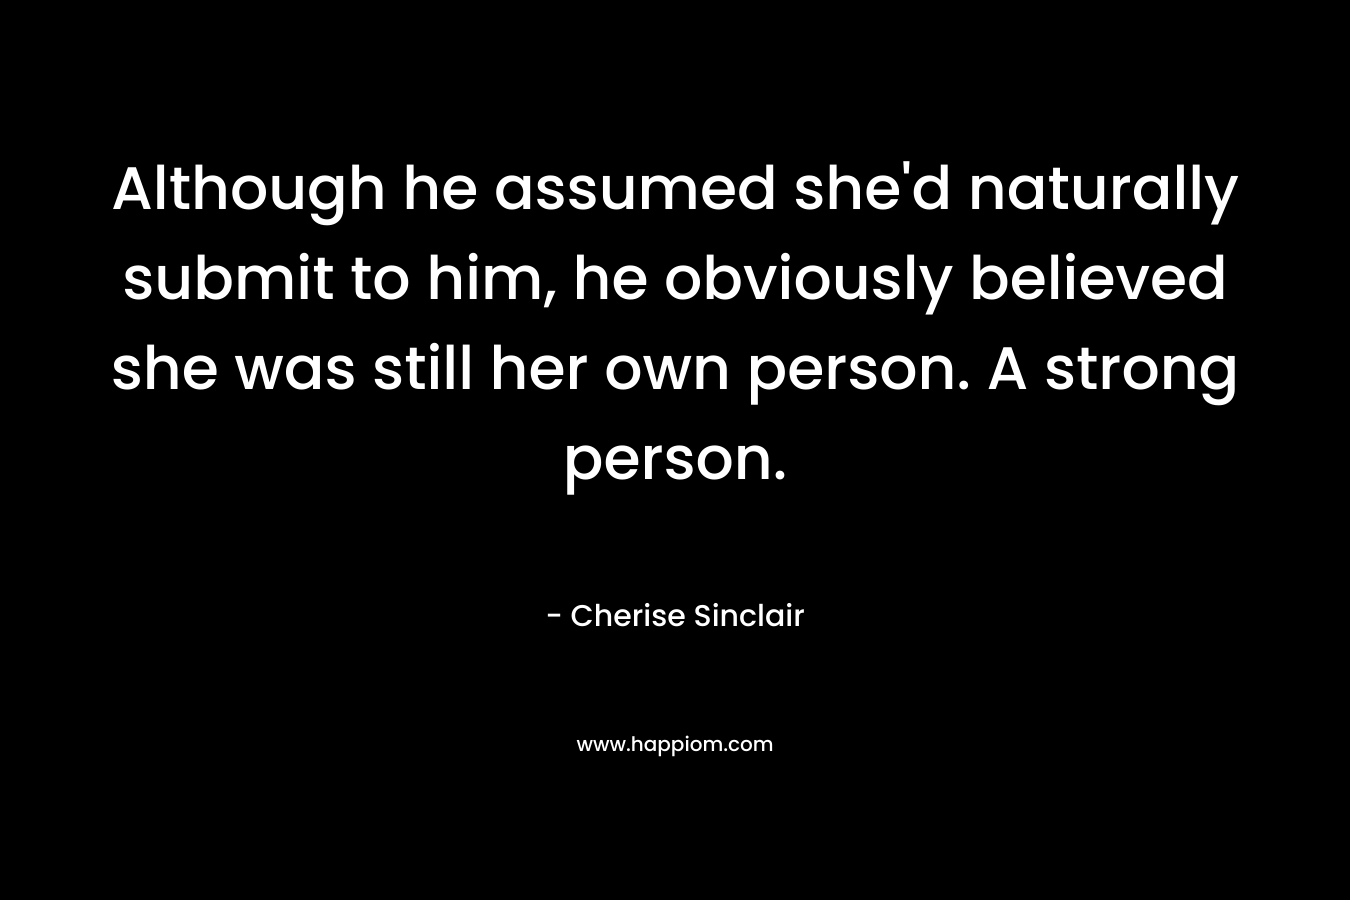 Although he assumed she’d naturally submit to him, he obviously believed she was still her own person. A strong person. – Cherise Sinclair